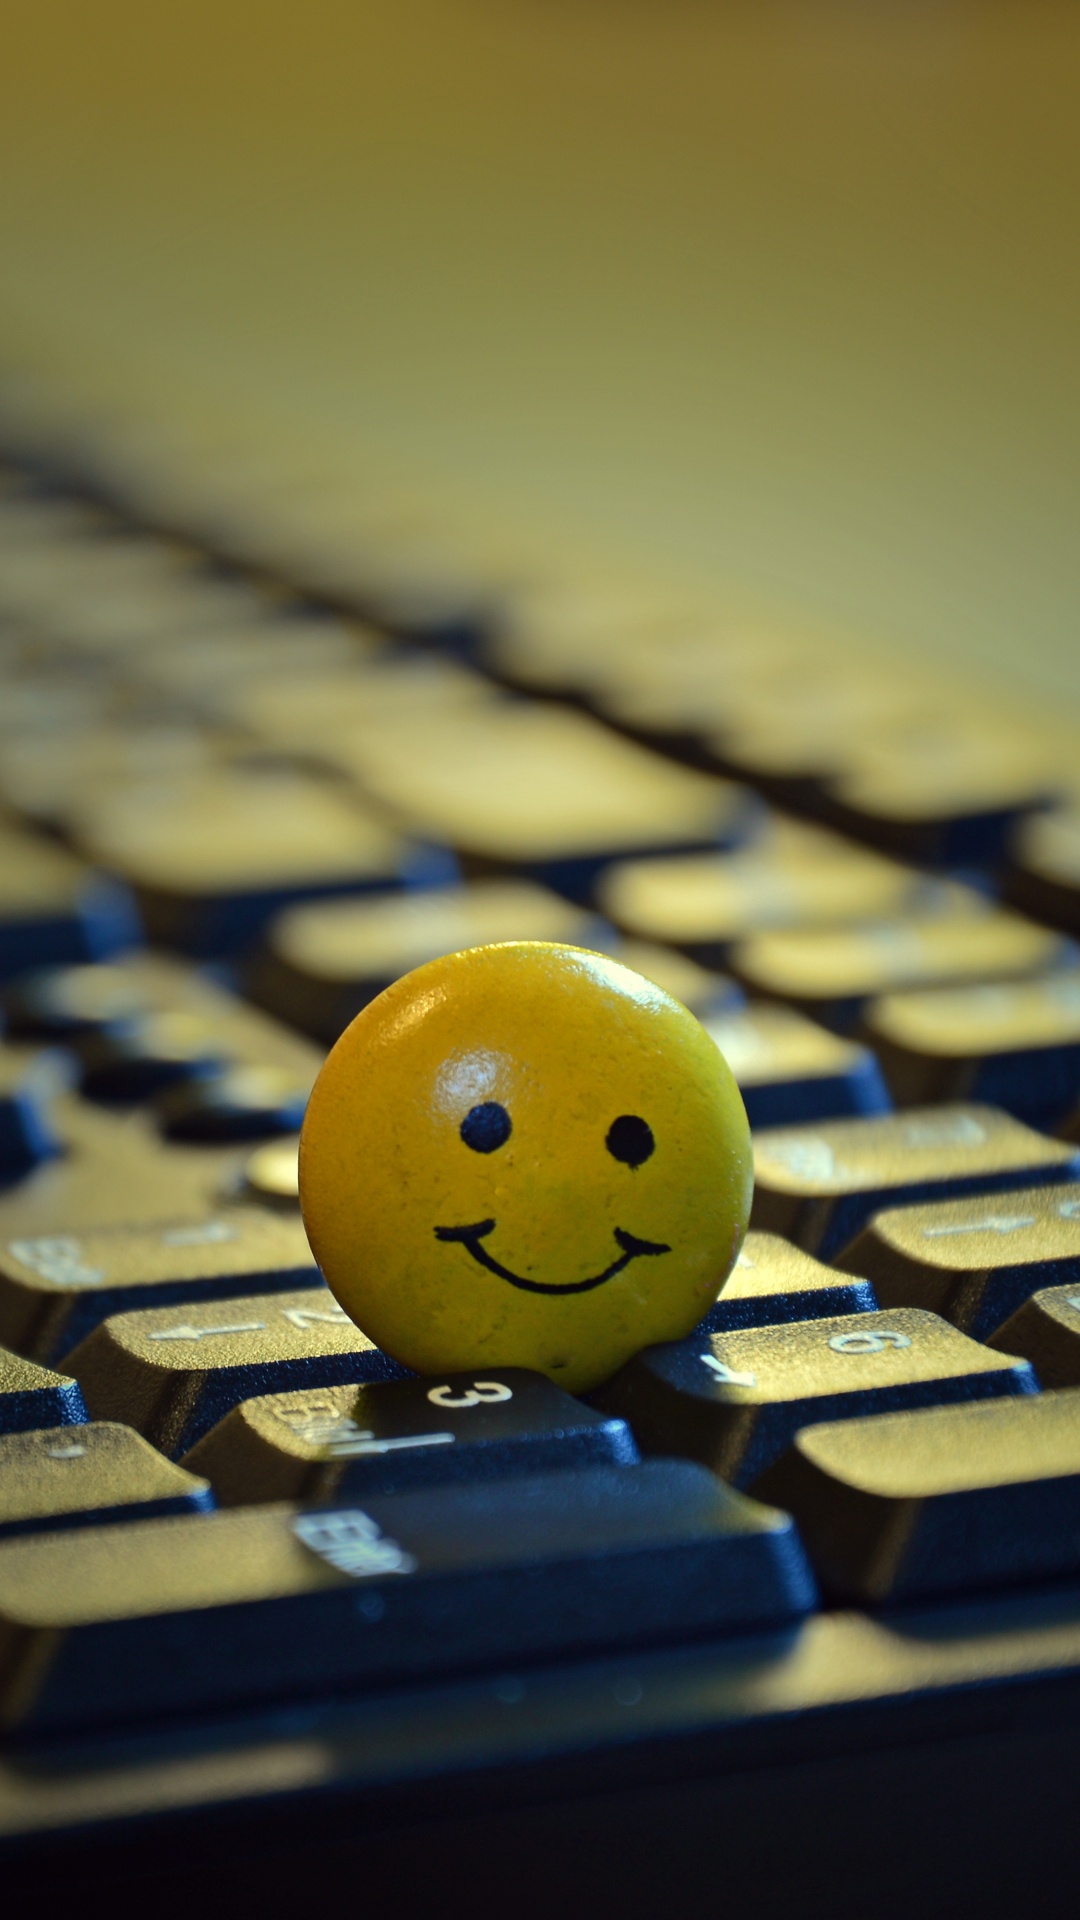 Yellow Smiley Ball on Black Computer Keyboard. Wallpaper in 1080x1920 Resolution